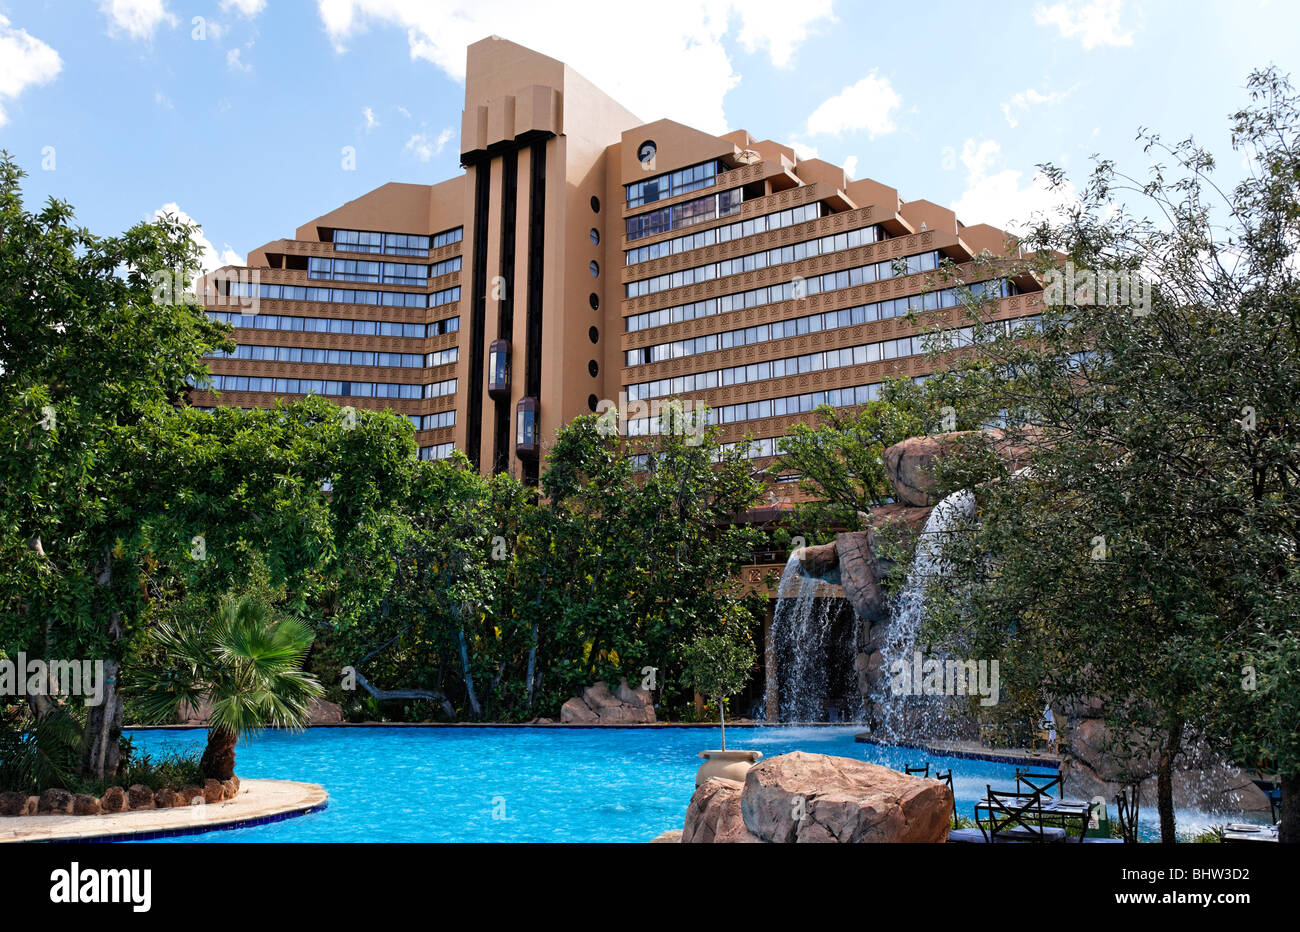 Cascades Hotel and swimming pool Suncity, Northwest Province South Africa Stock Photo